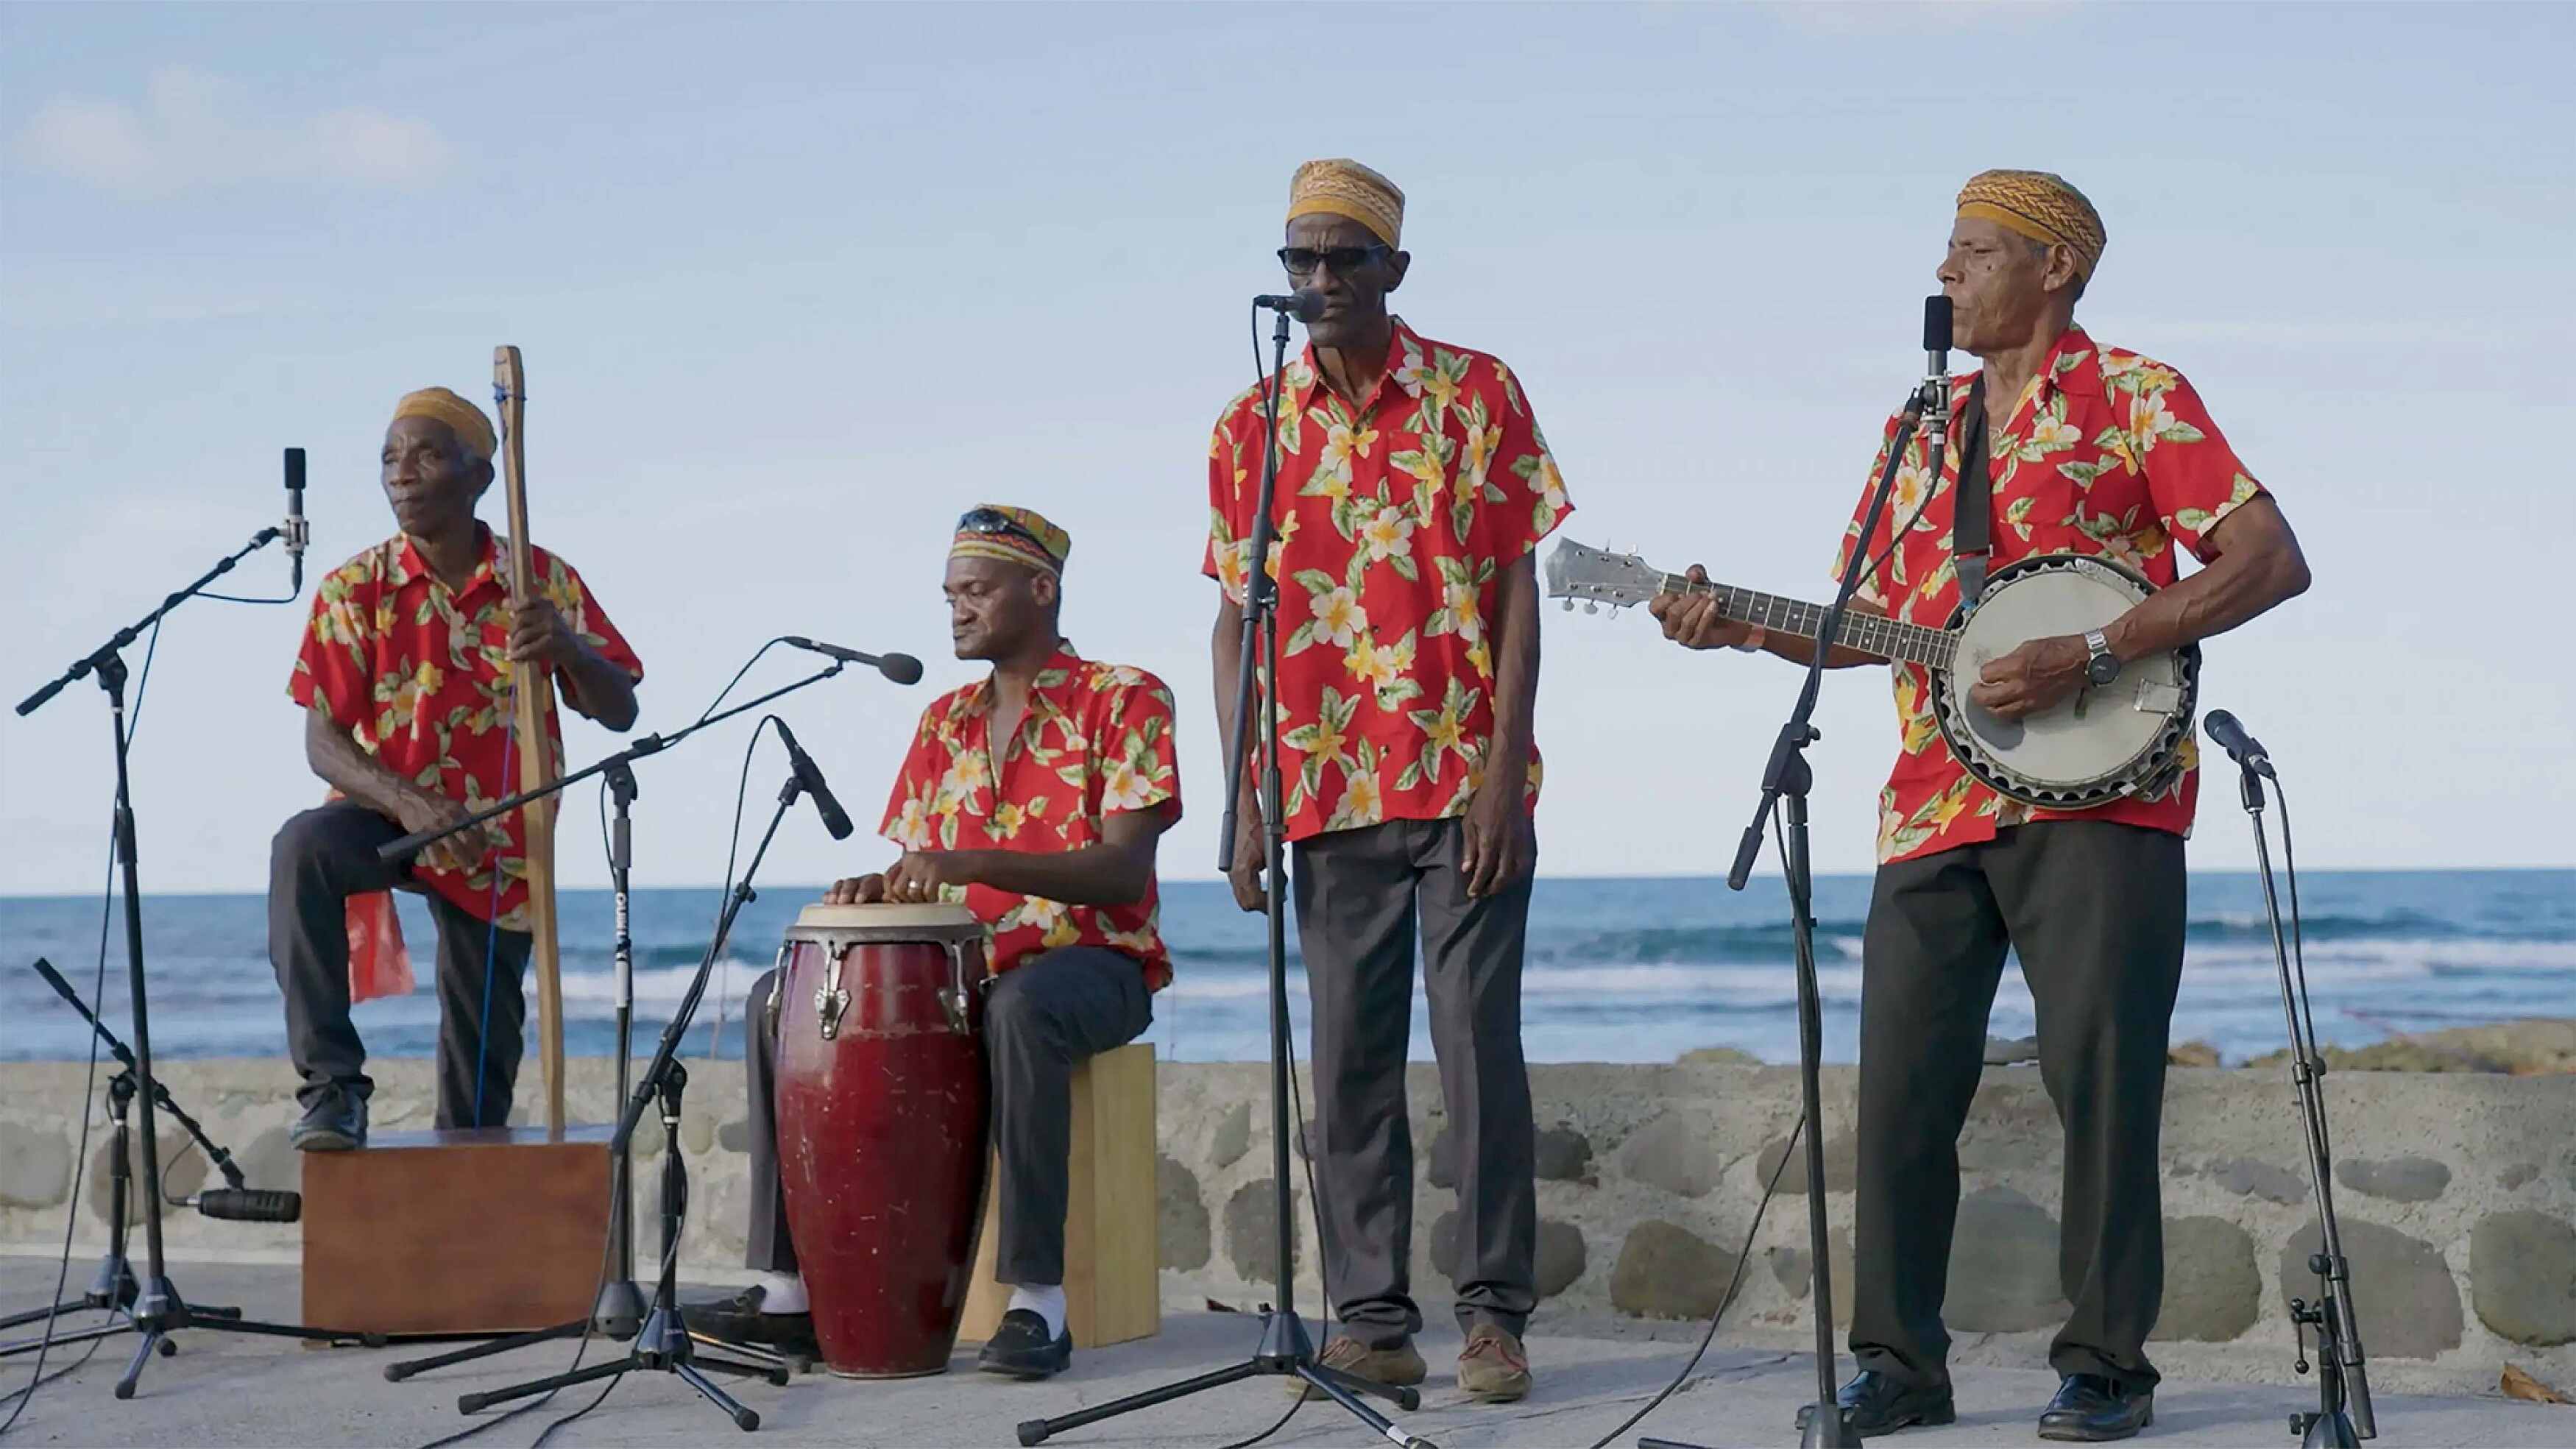 15 Facts About Calypso Music - Facts.net